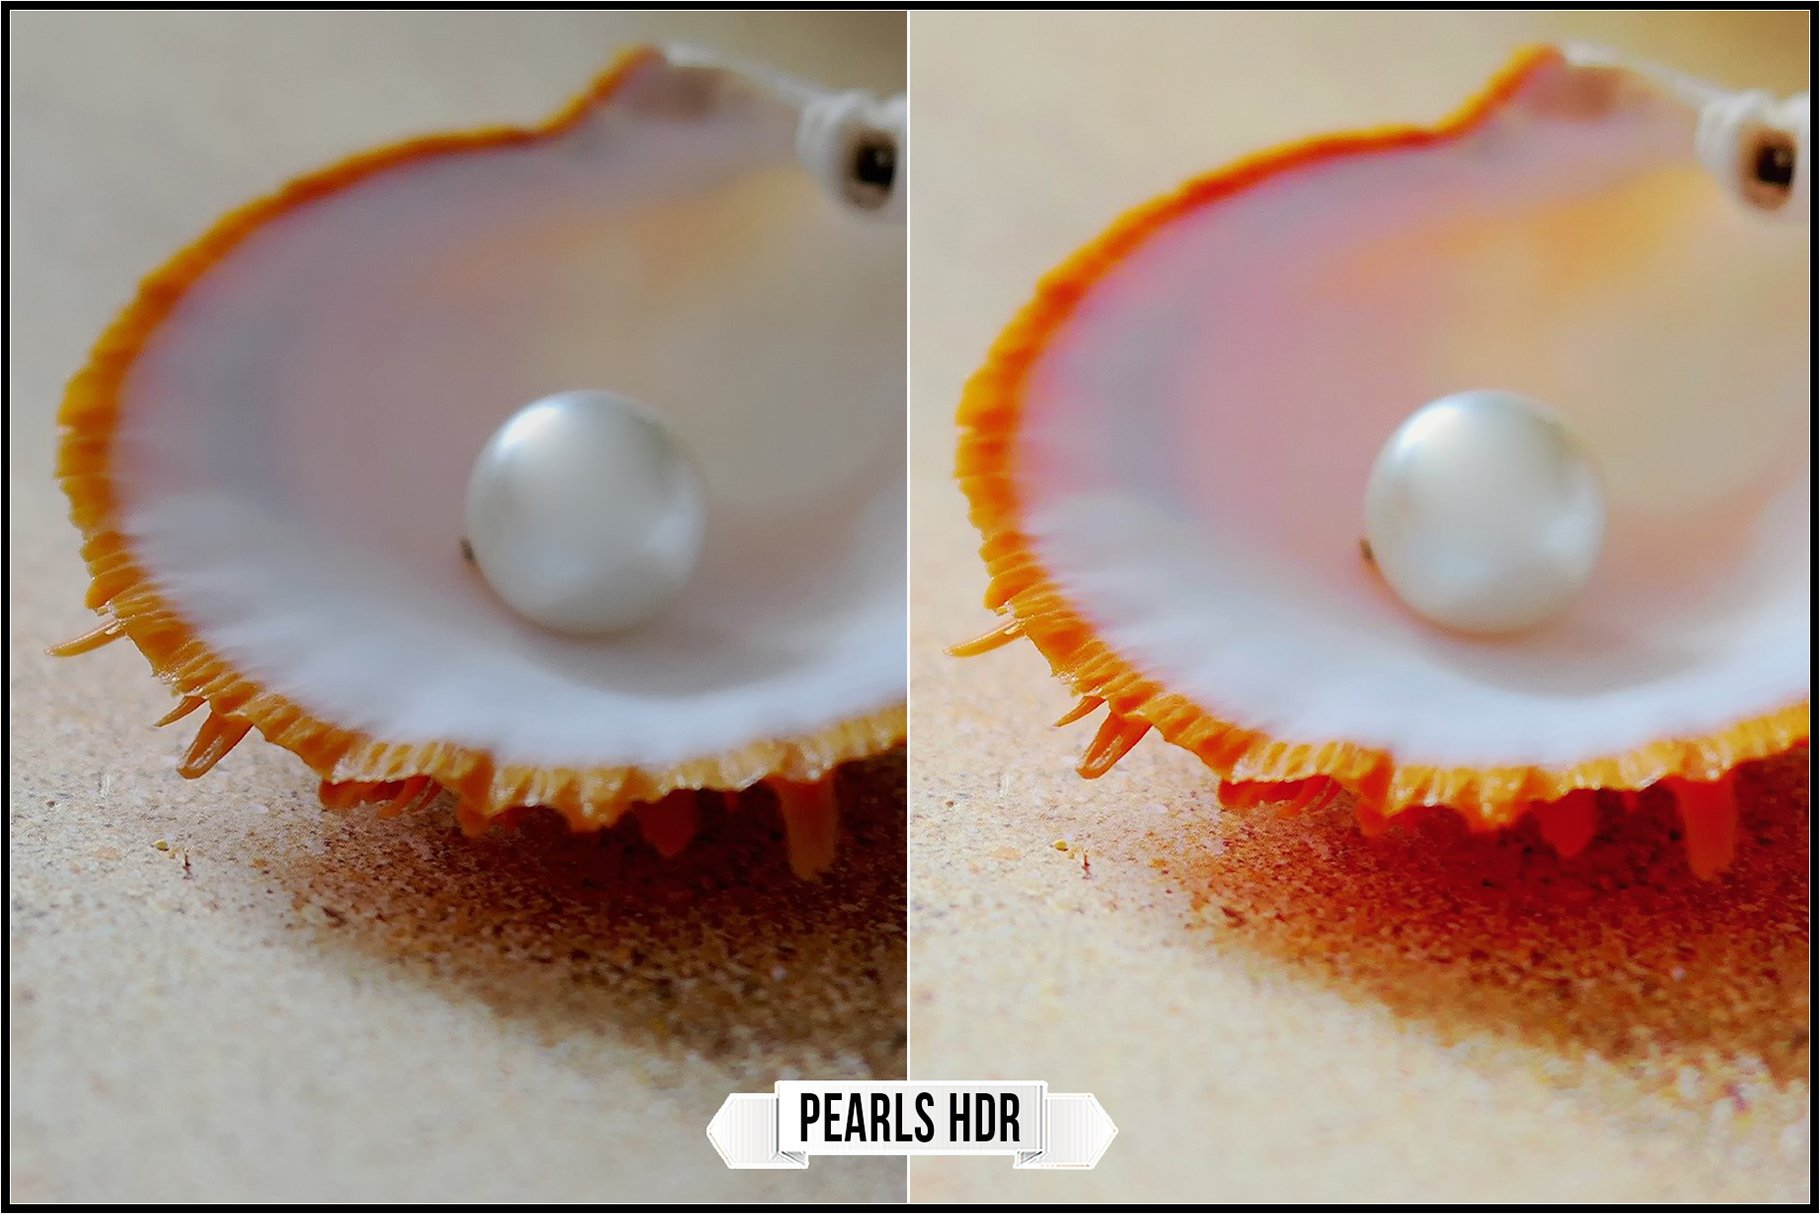 pearls hdr 953